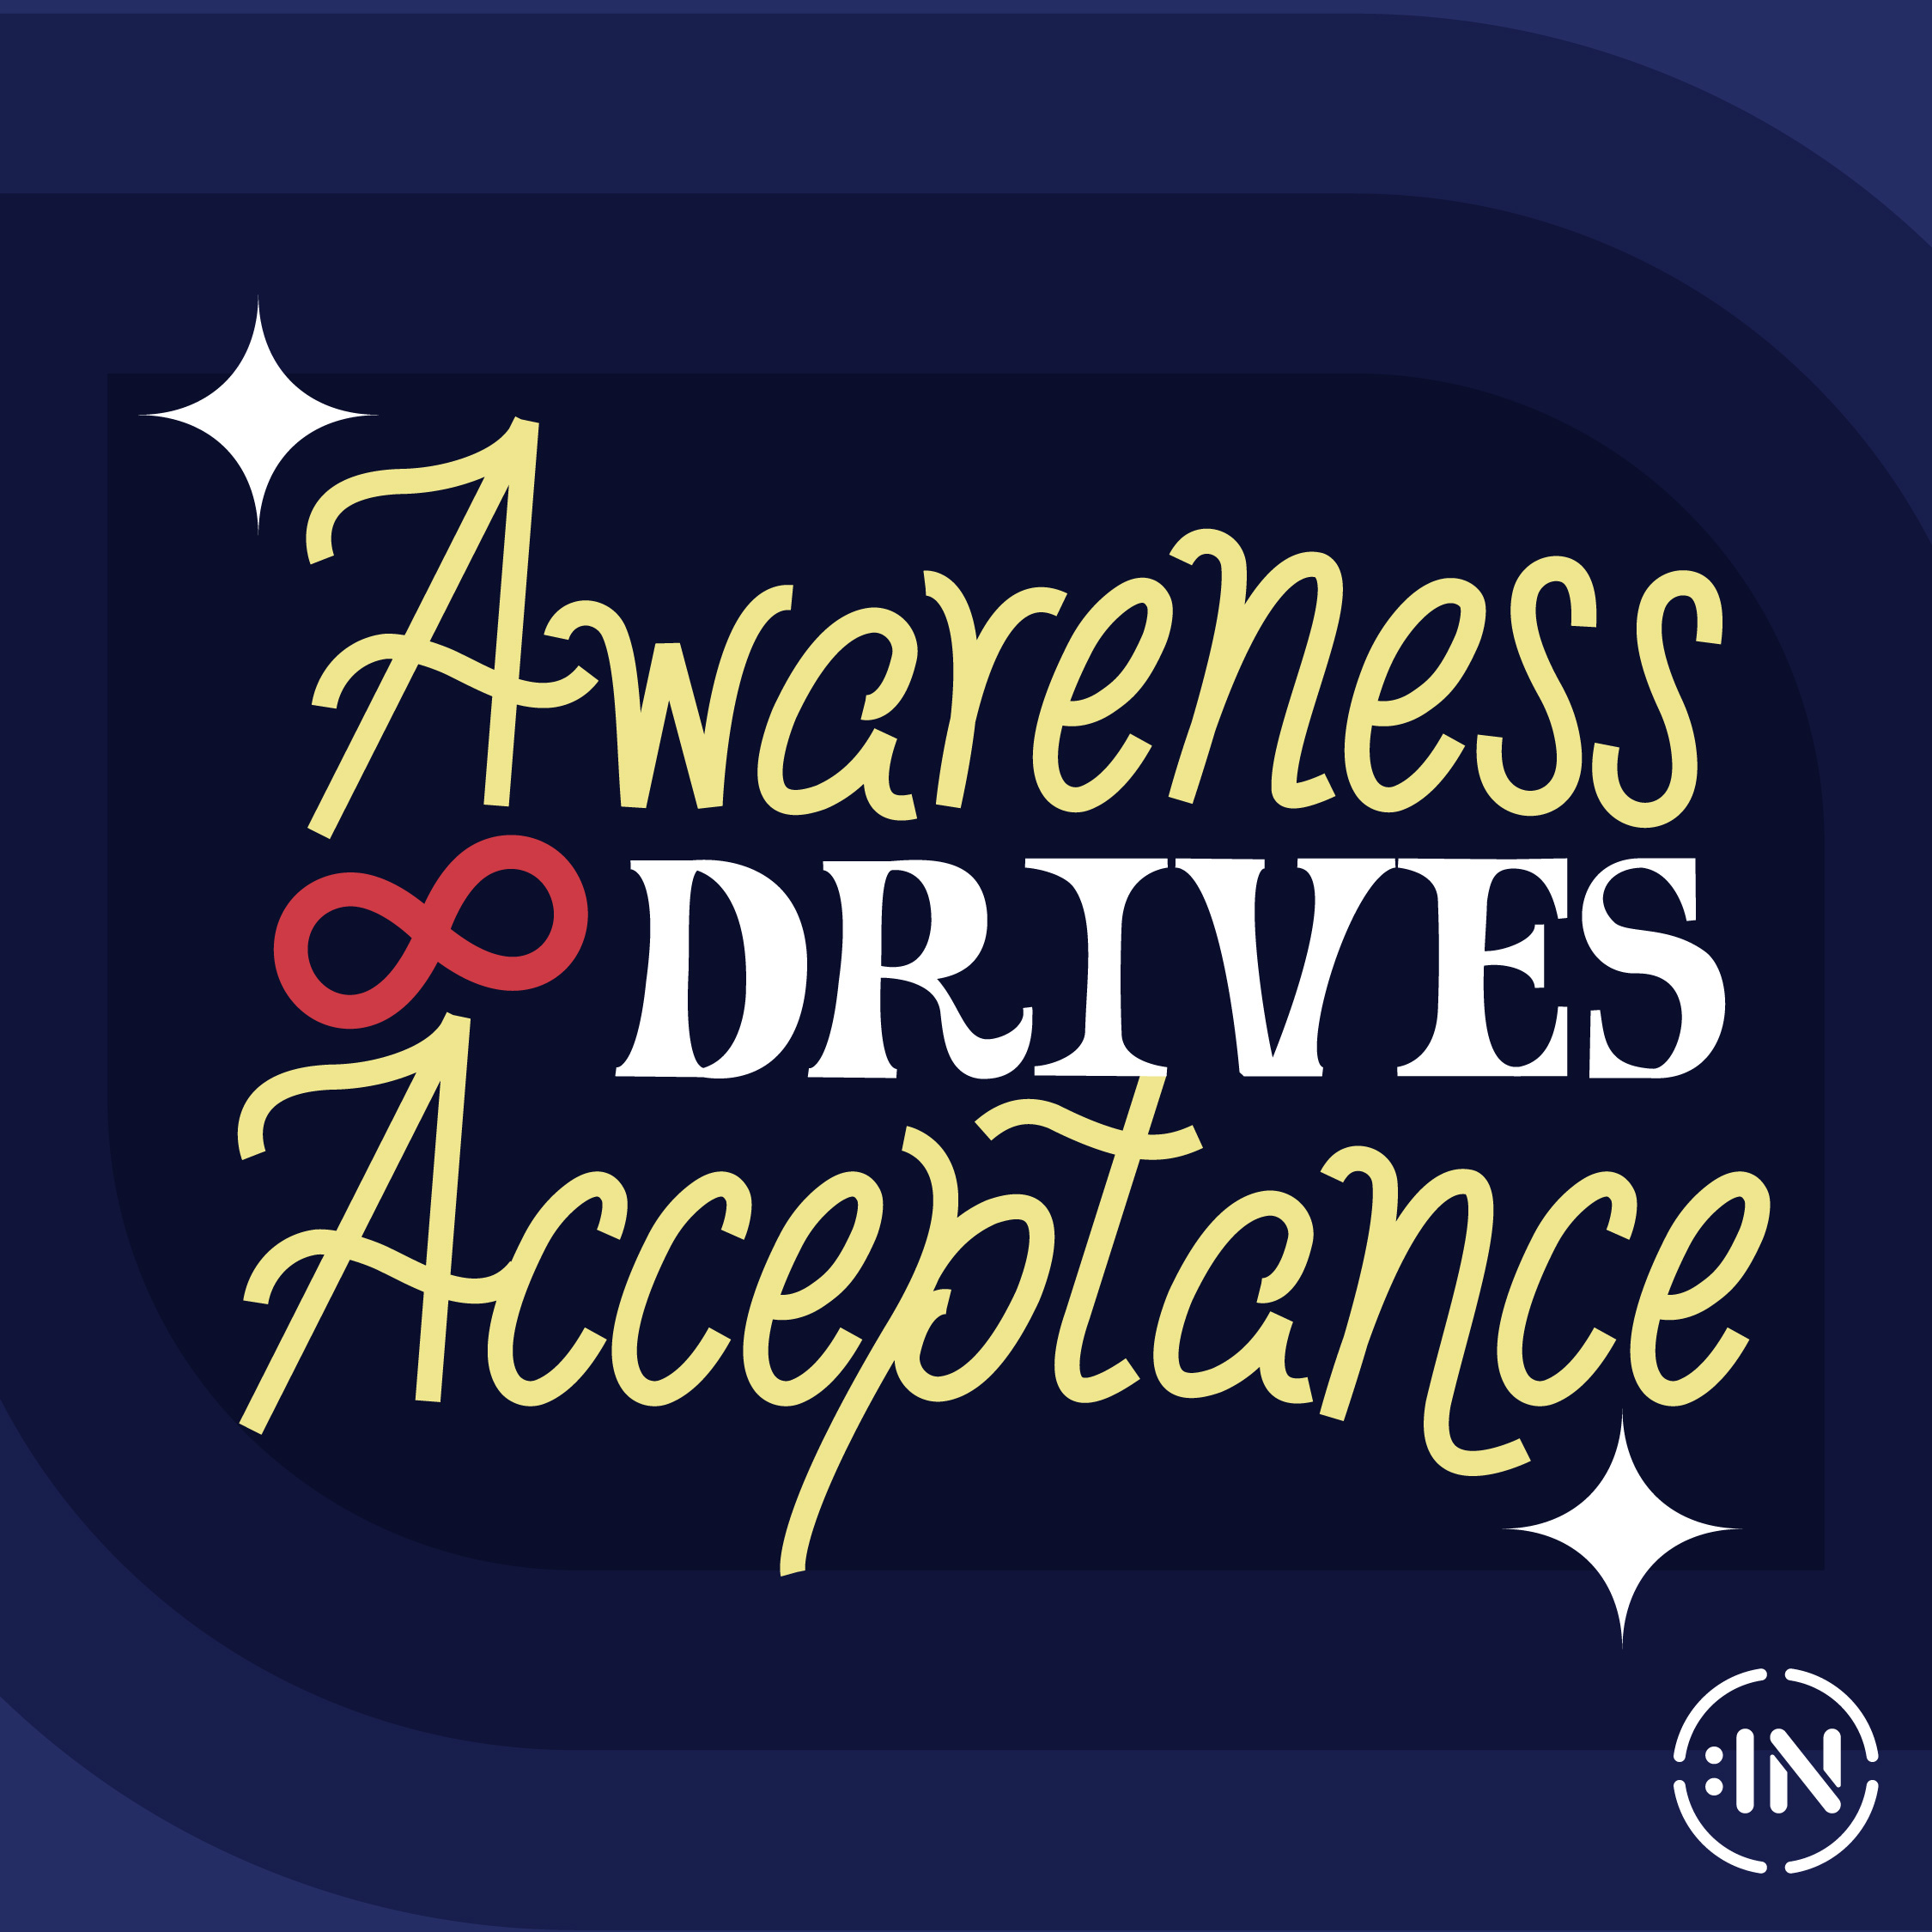 Blue background behind gold and white text that reads Awareness Drives Acceptance. At the center is a red infinity symbol representing the Autistic Community.